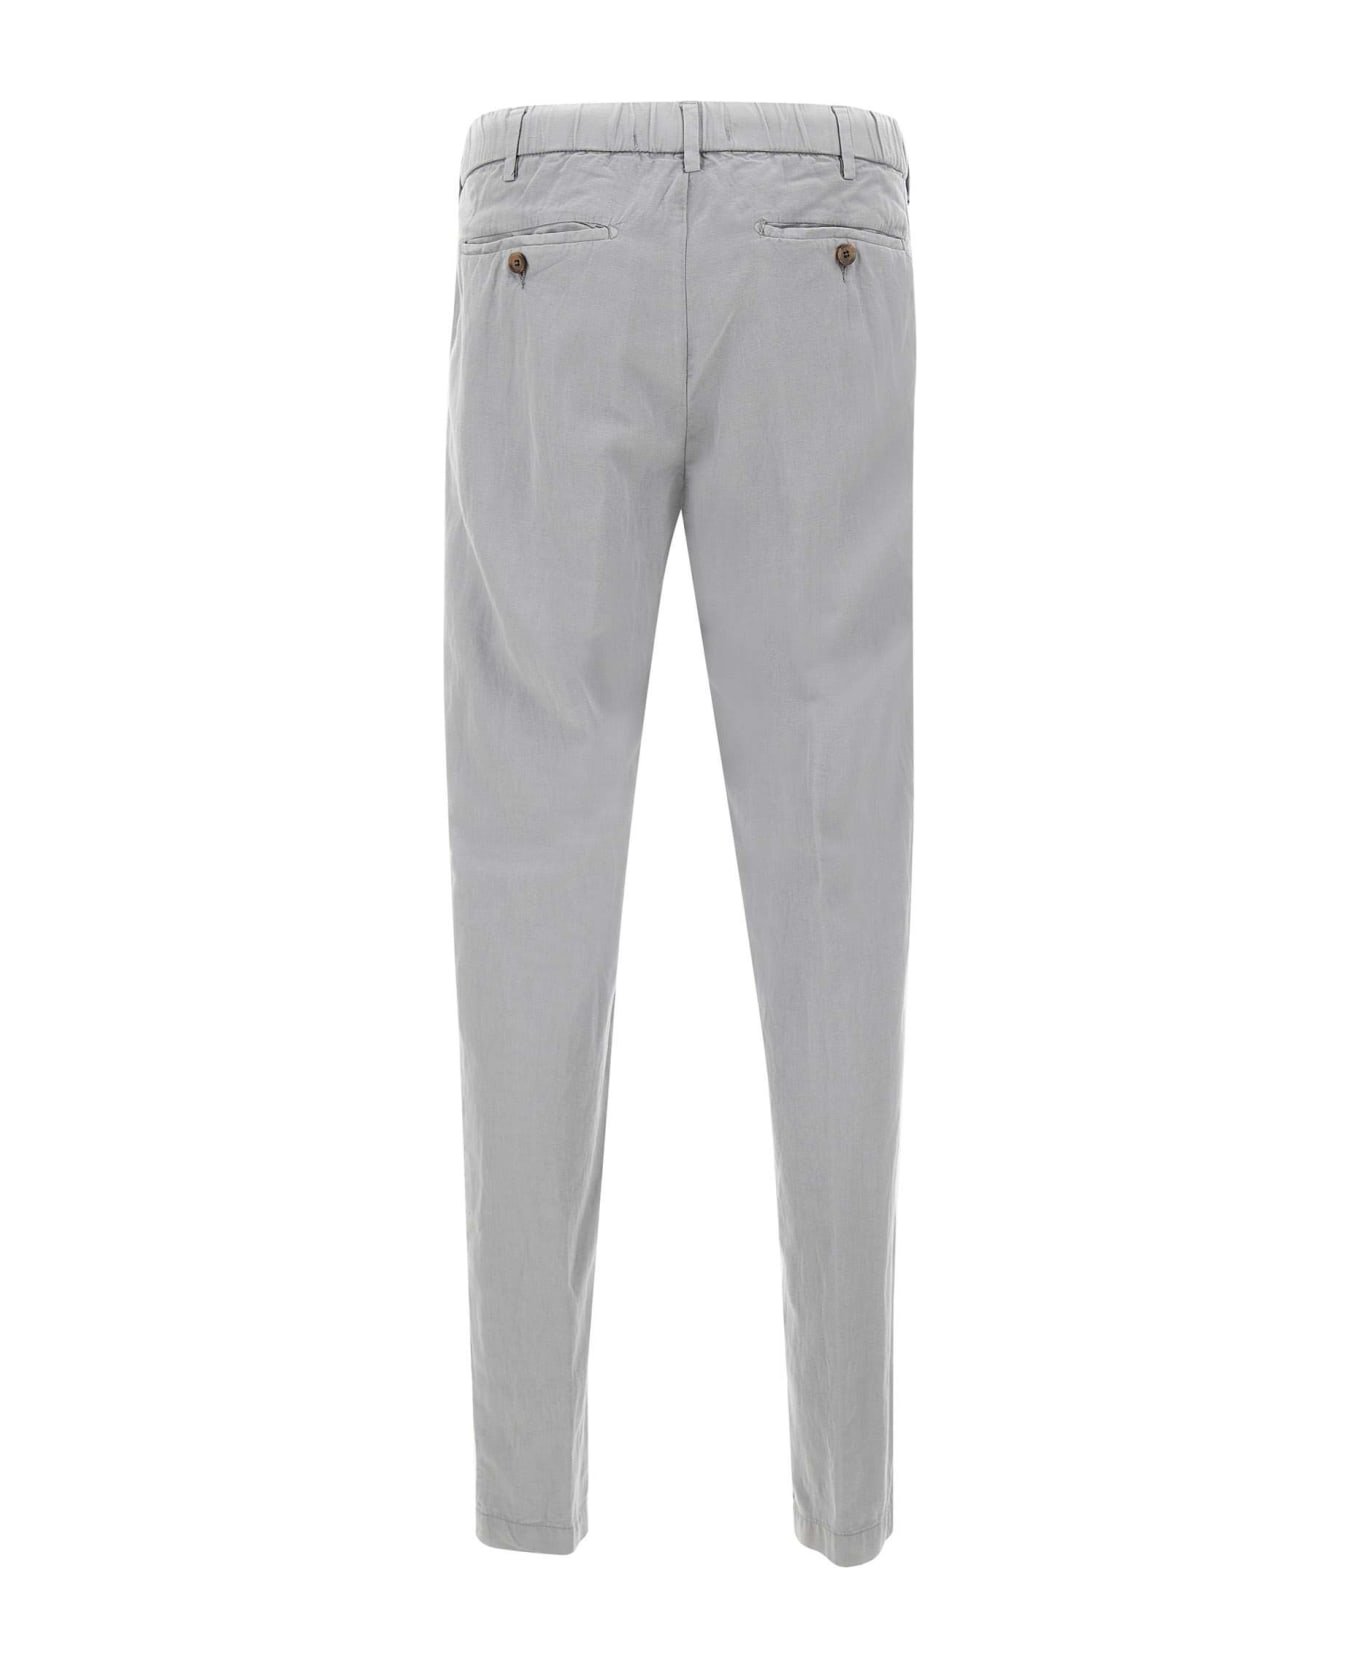 Myths "apollo" Linen And Cotton Trousers - GREY